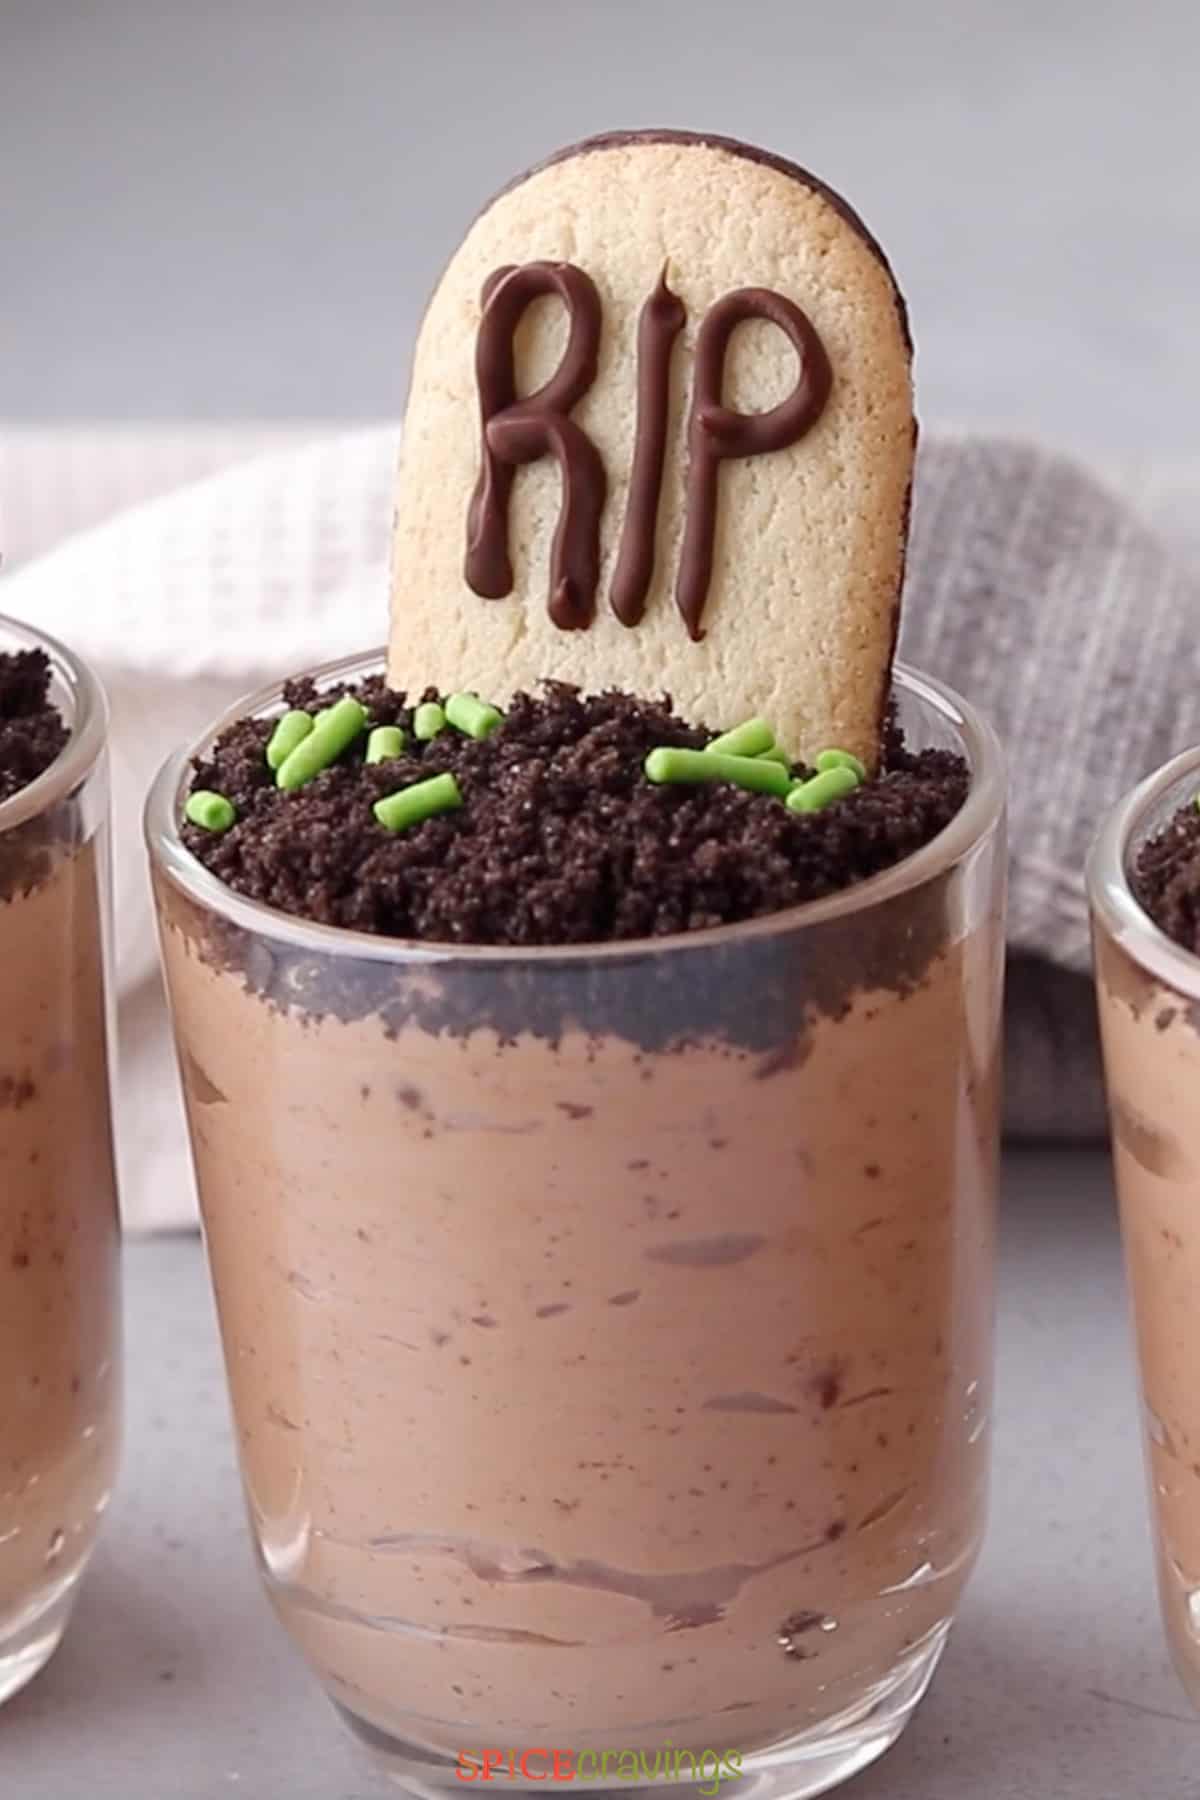 Chocolate Mousse Graveyard made using Oreo Cookies, milano cookies and mousse